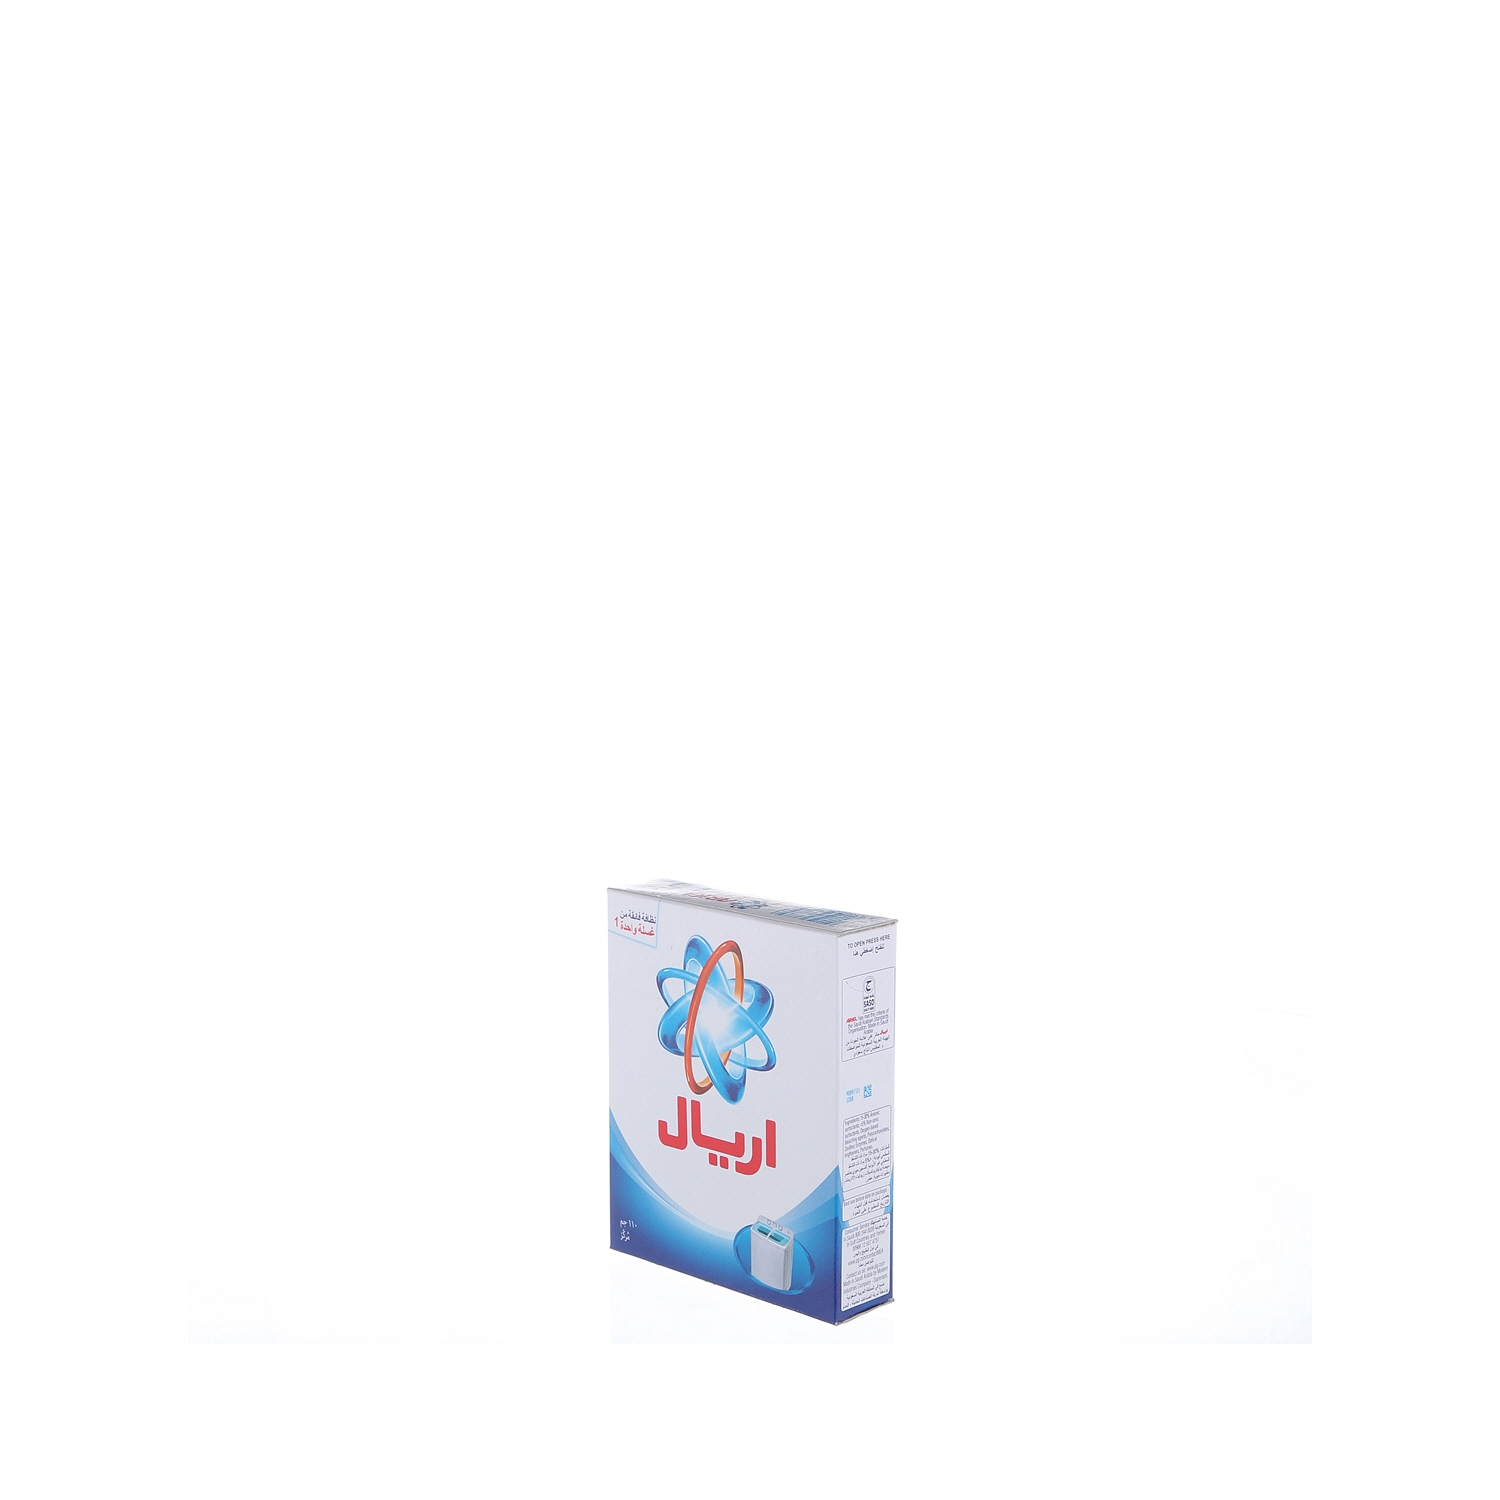 Ariel Detergent Concentrated Blue 110 g